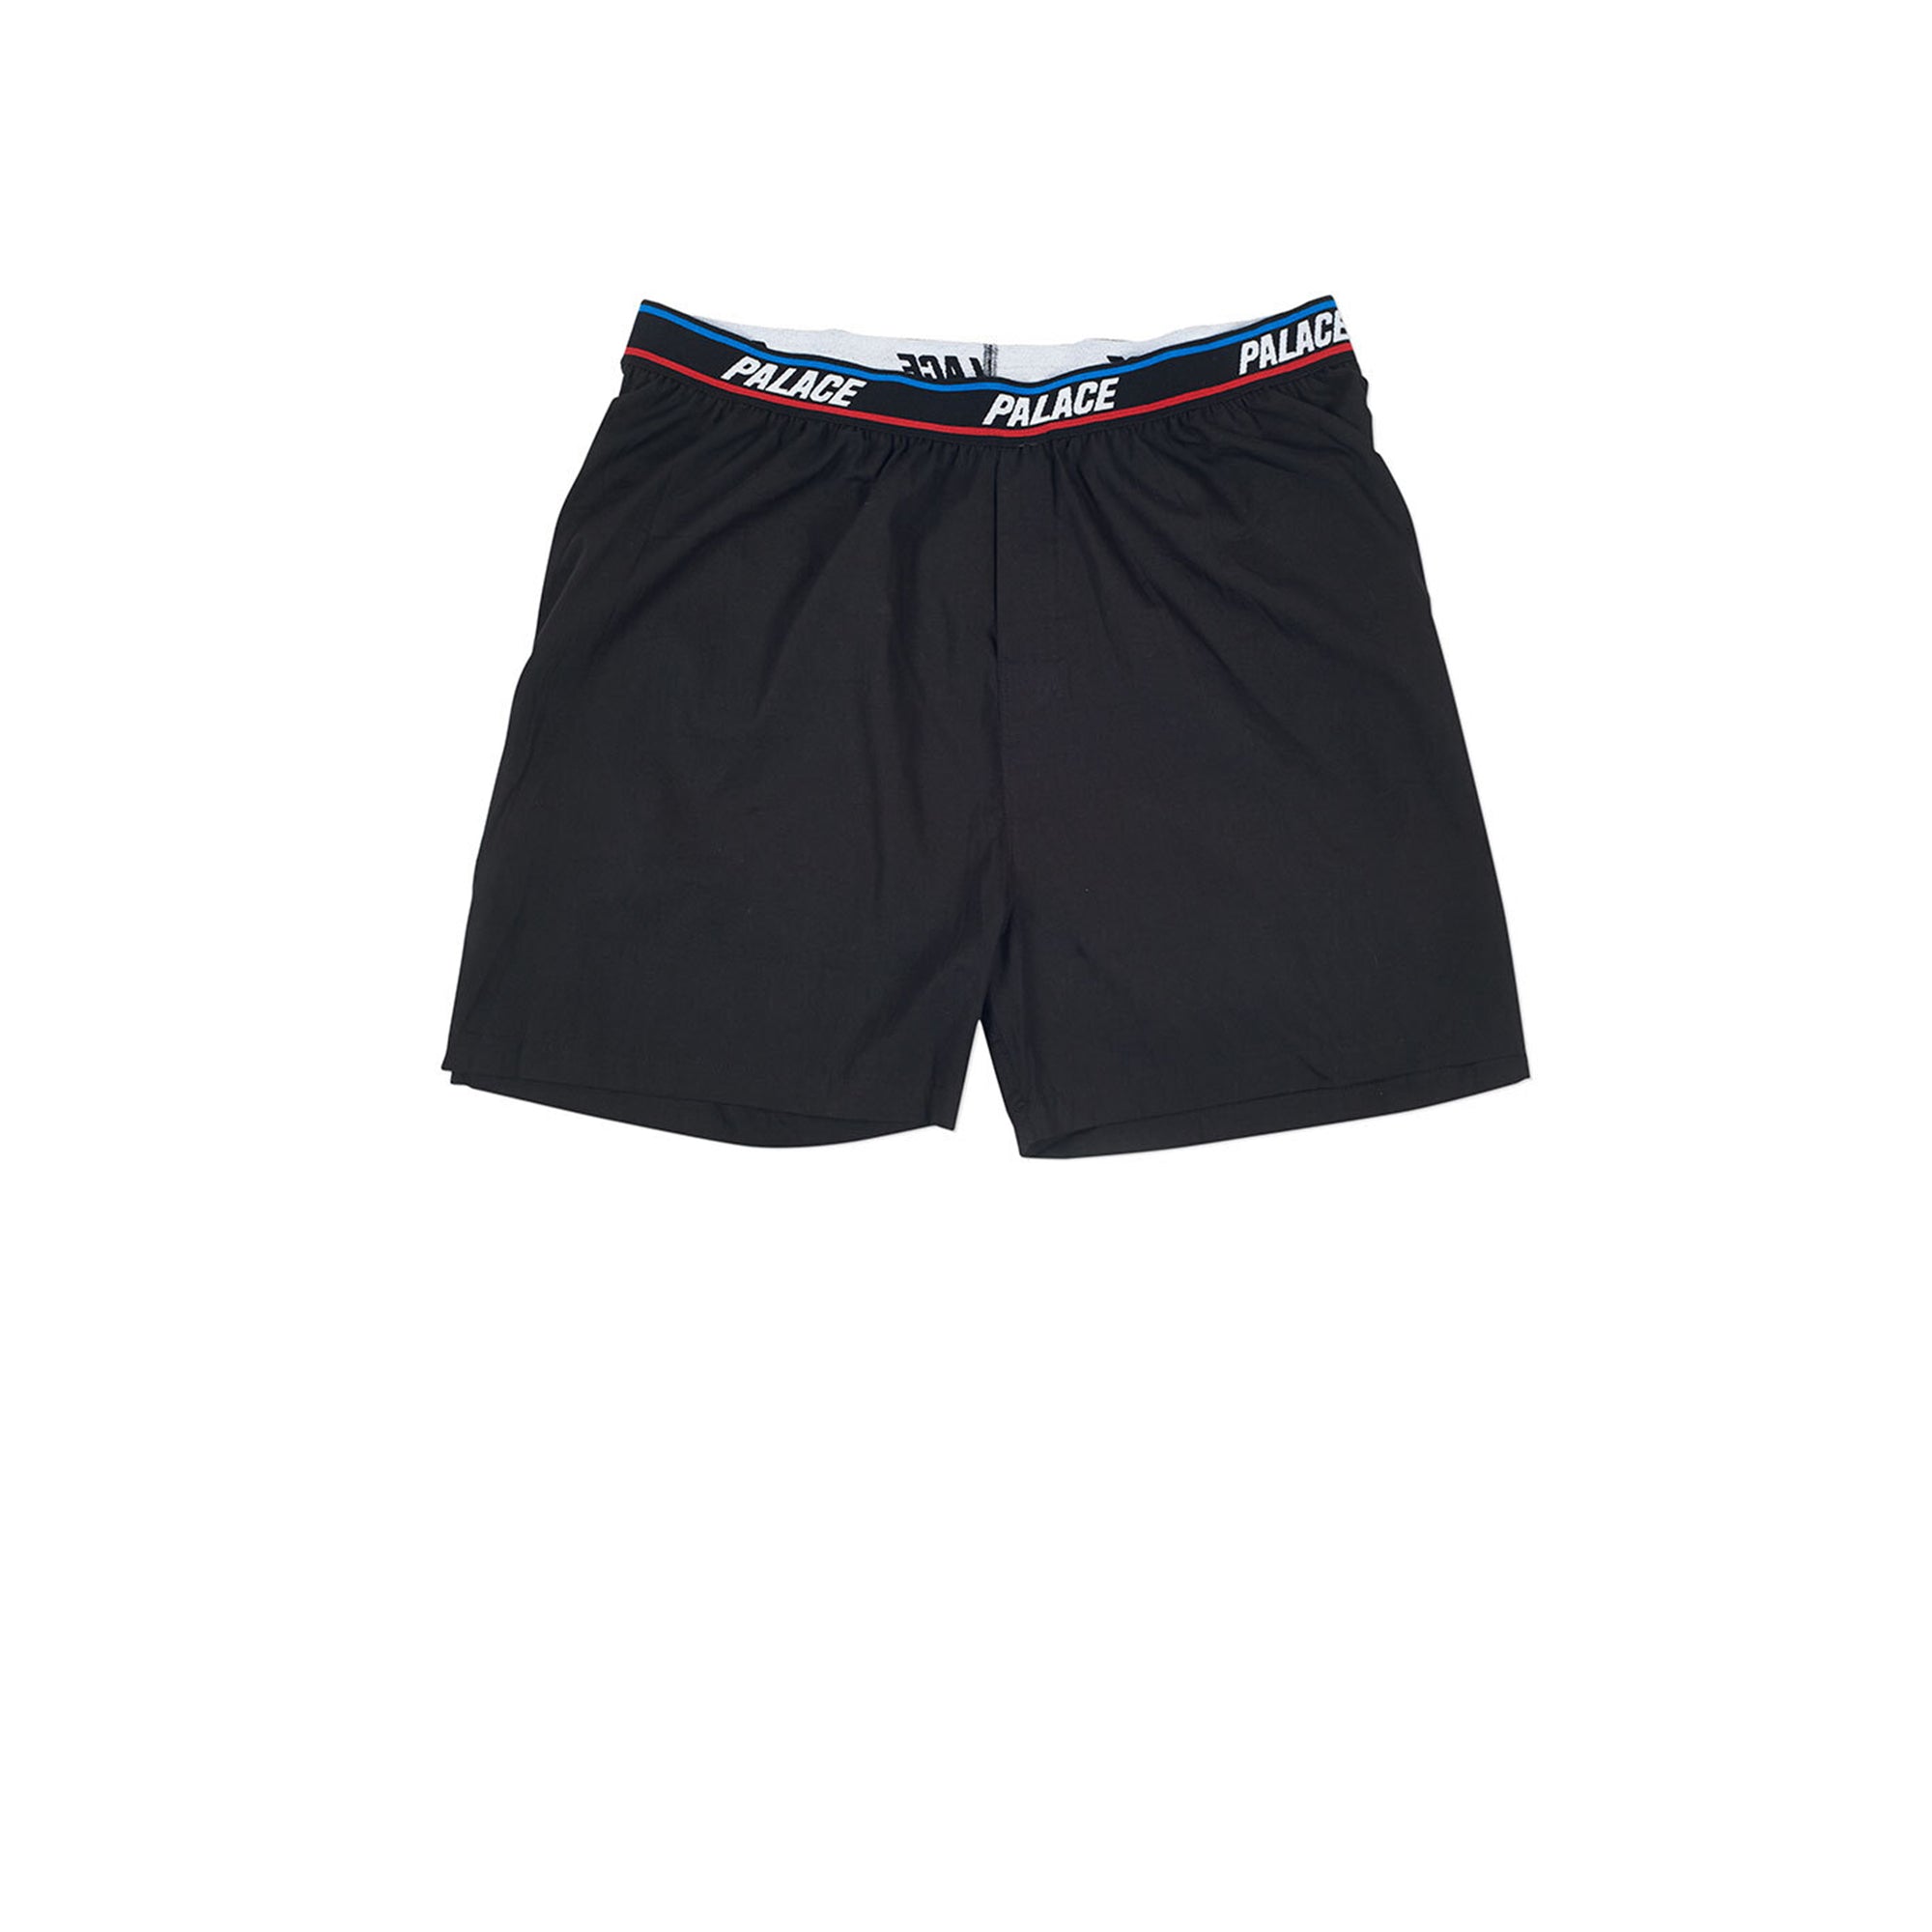 Palace - Men’s Basically A Pack Of Boxers - (Black/Natural) view 3